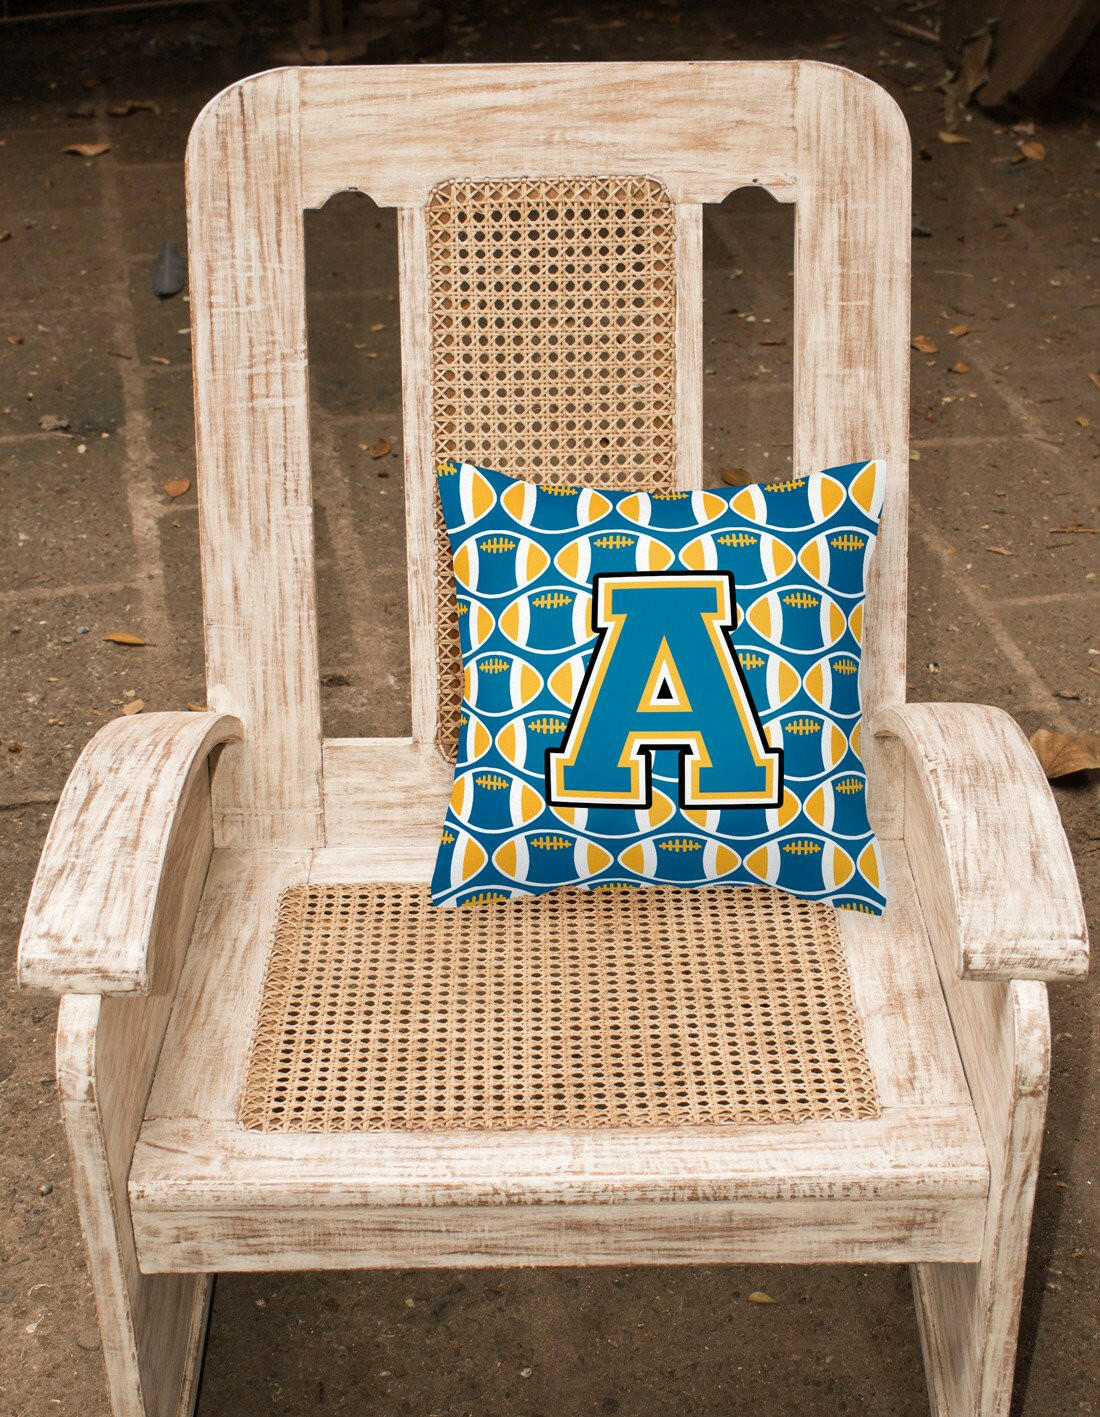 Letter A Football Blue and Gold Fabric Decorative Pillow CJ1077-APW1414 by Caroline's Treasures